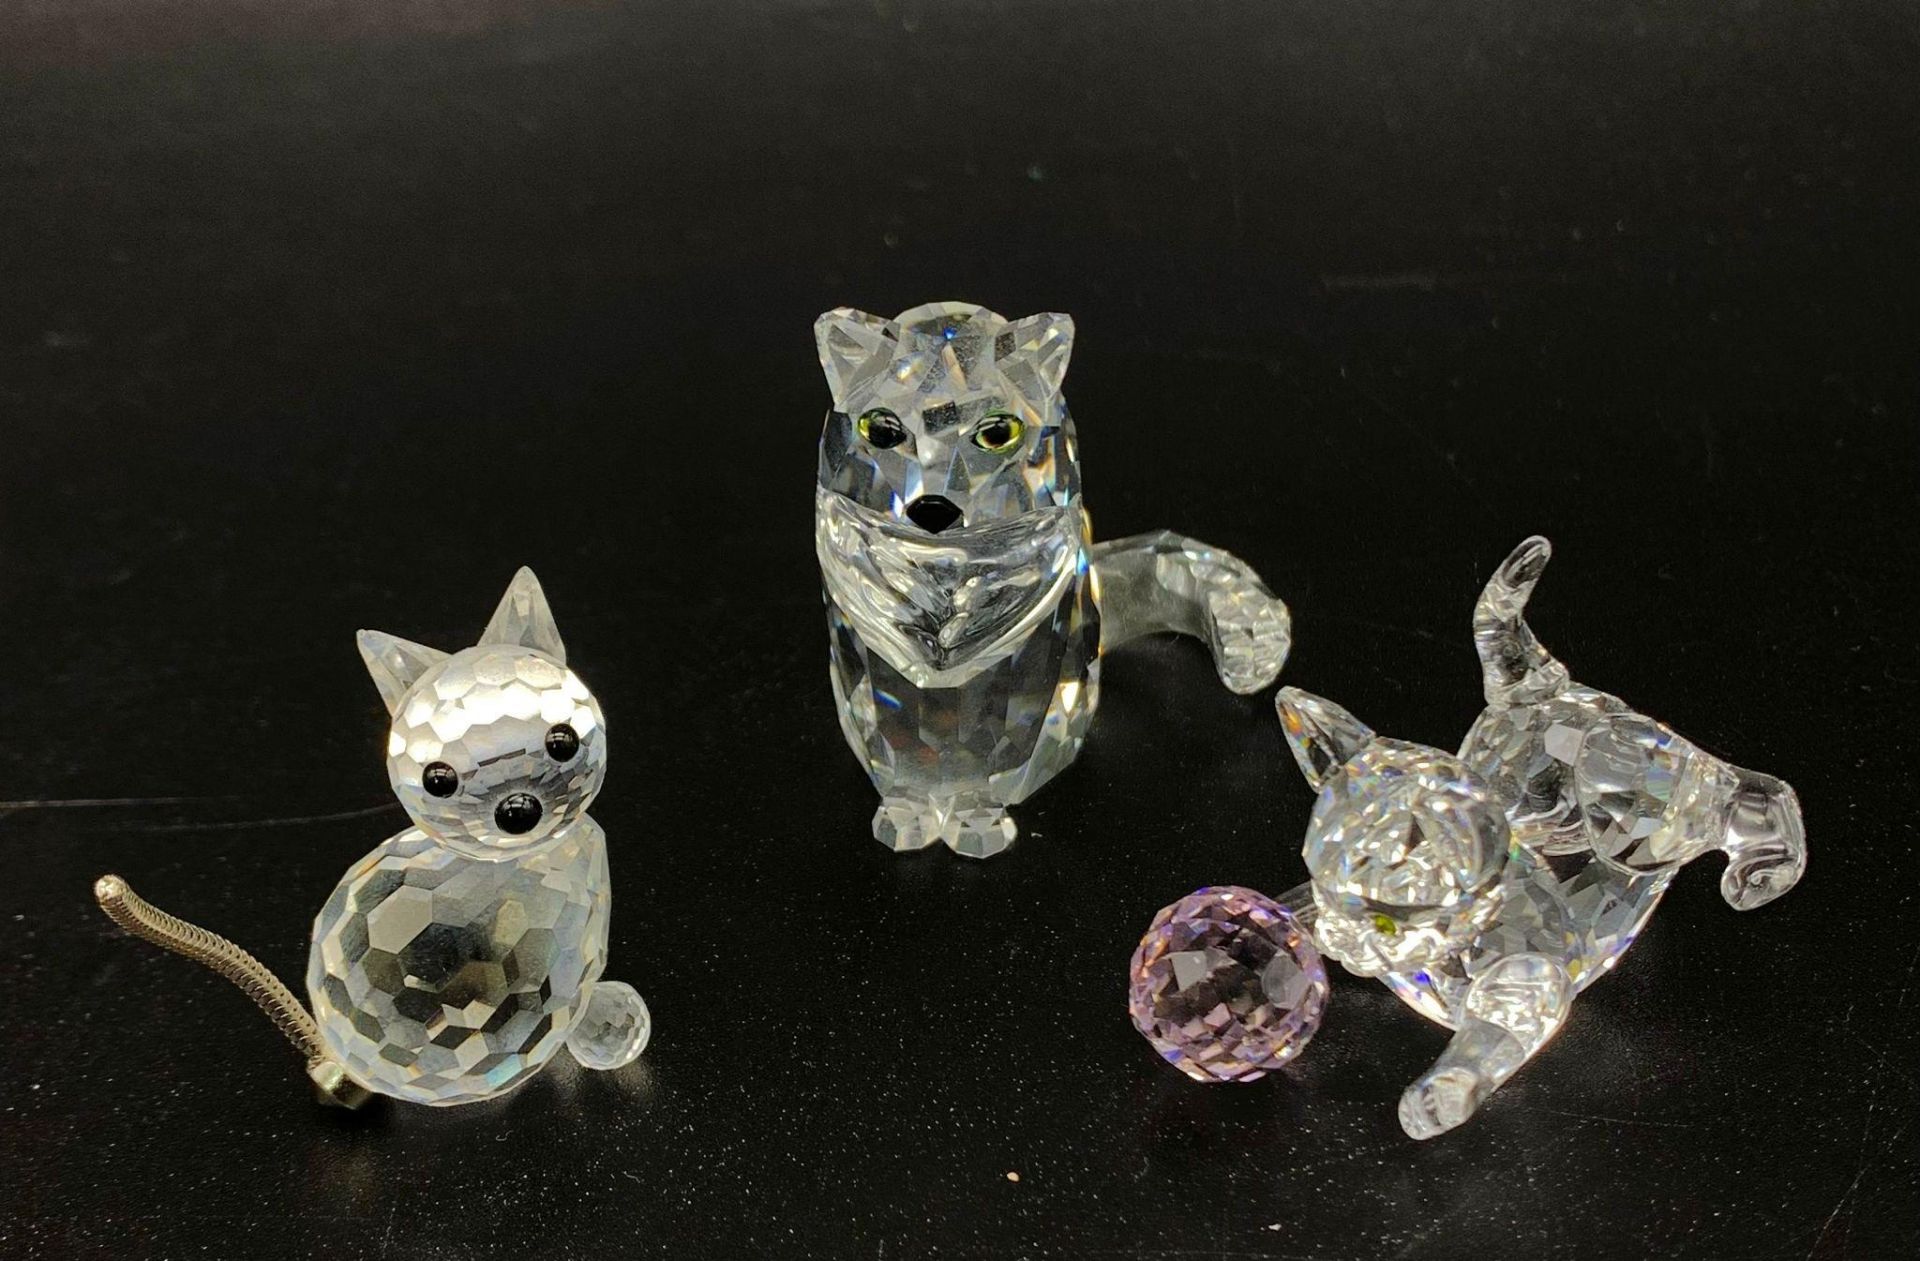 3 BRAND NEW SWAROVSKI CRYSTAL FIGURES OF CATS (SEE PHOTO'S)